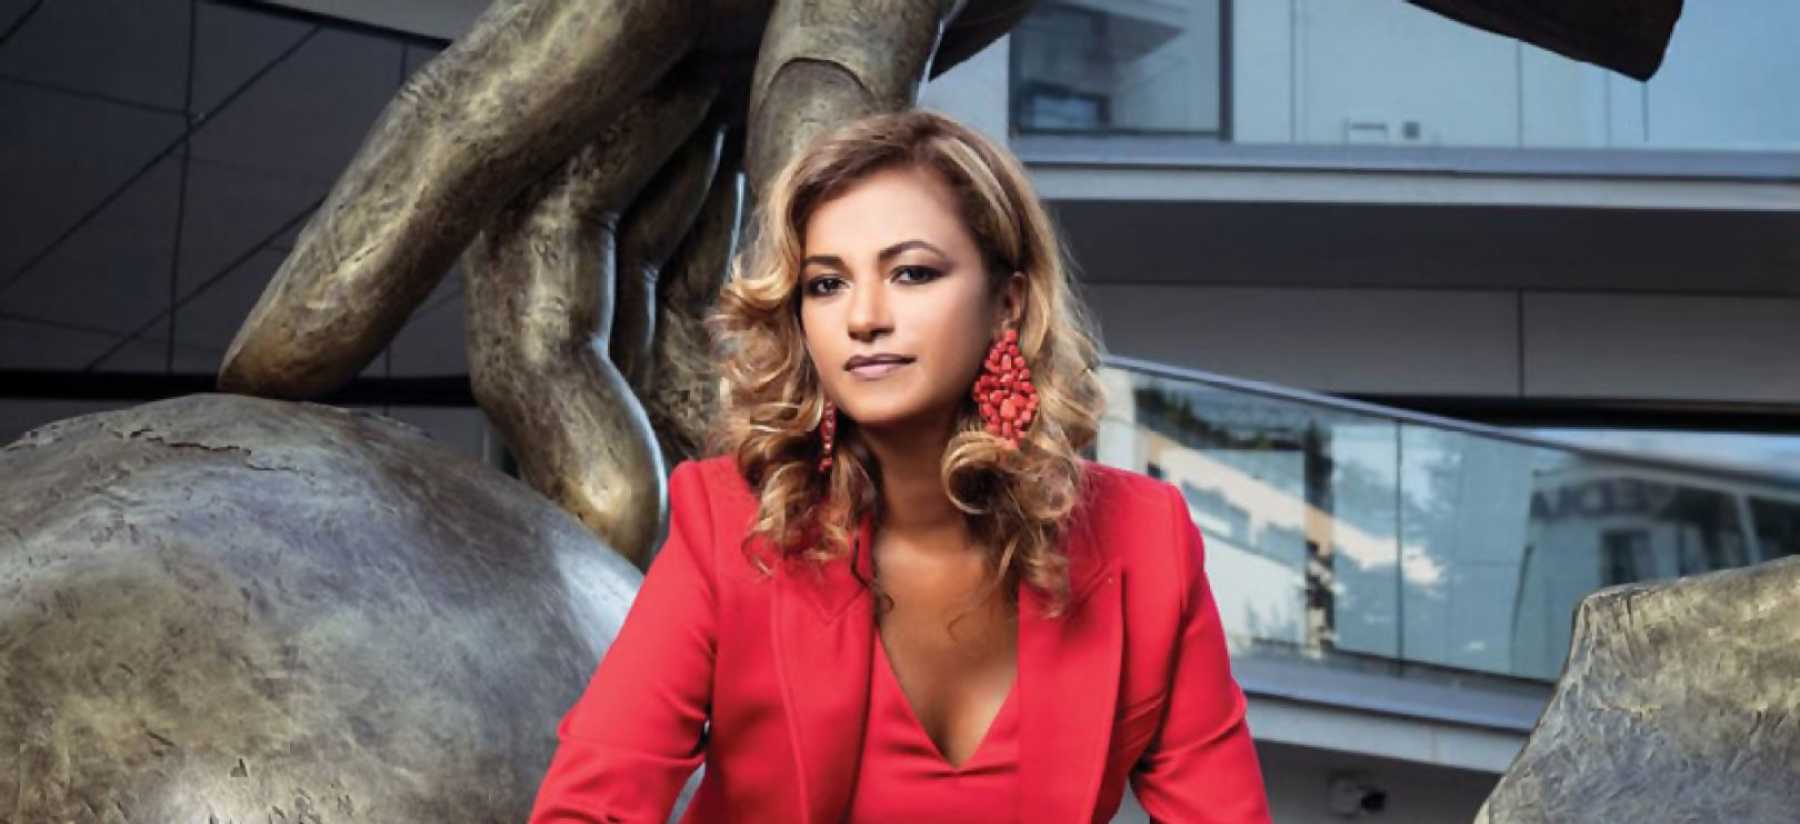 Beatrice Dumitrașcu, CEO Residential Division One United Properties, pentru wall-street.ro